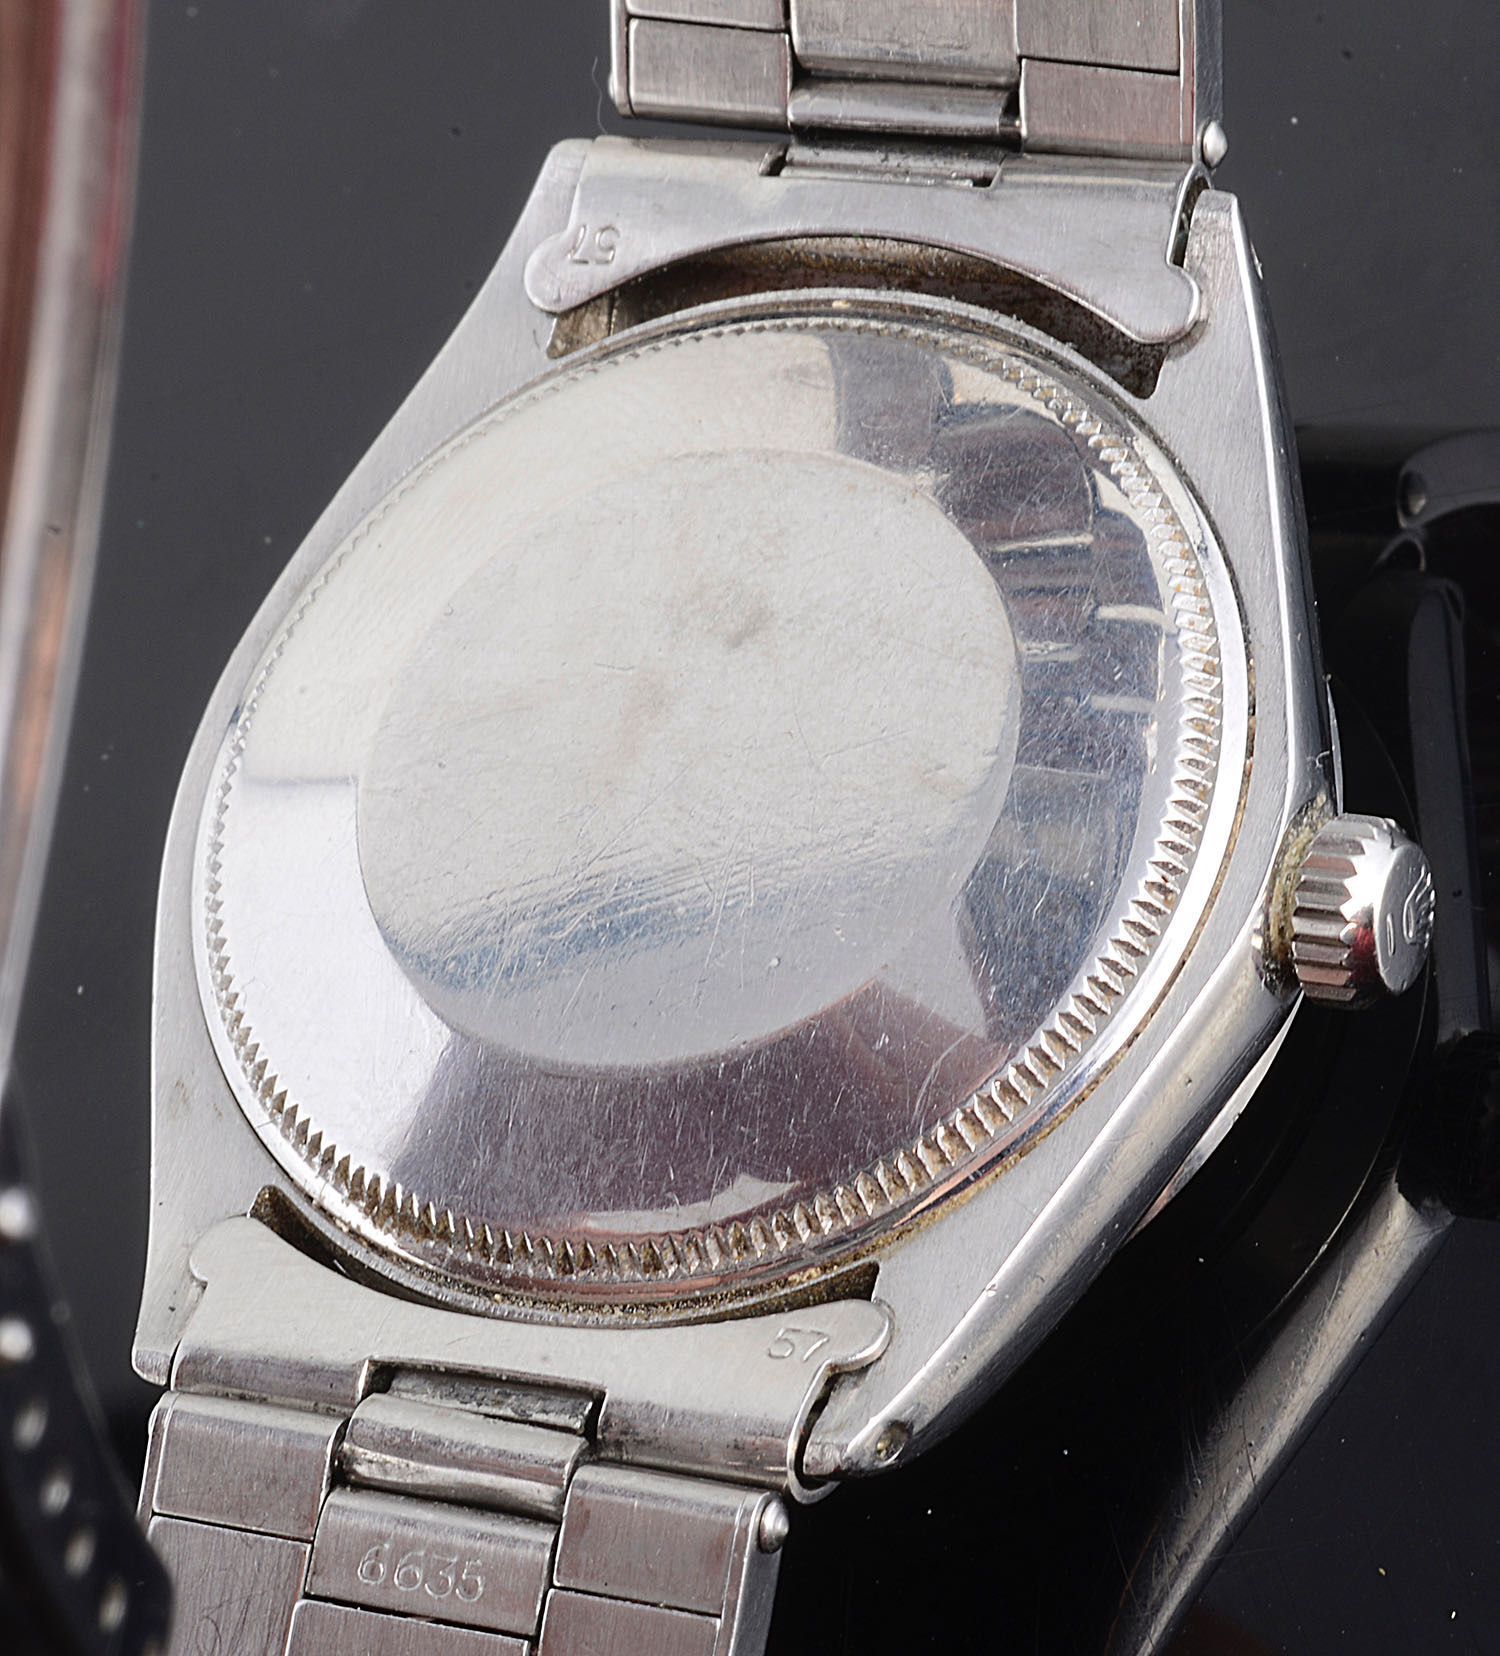 A Gentleman's Rolex Oyster Perpetual Air King Precision stainless steel wristwatch c.1970 - Image 3 of 3